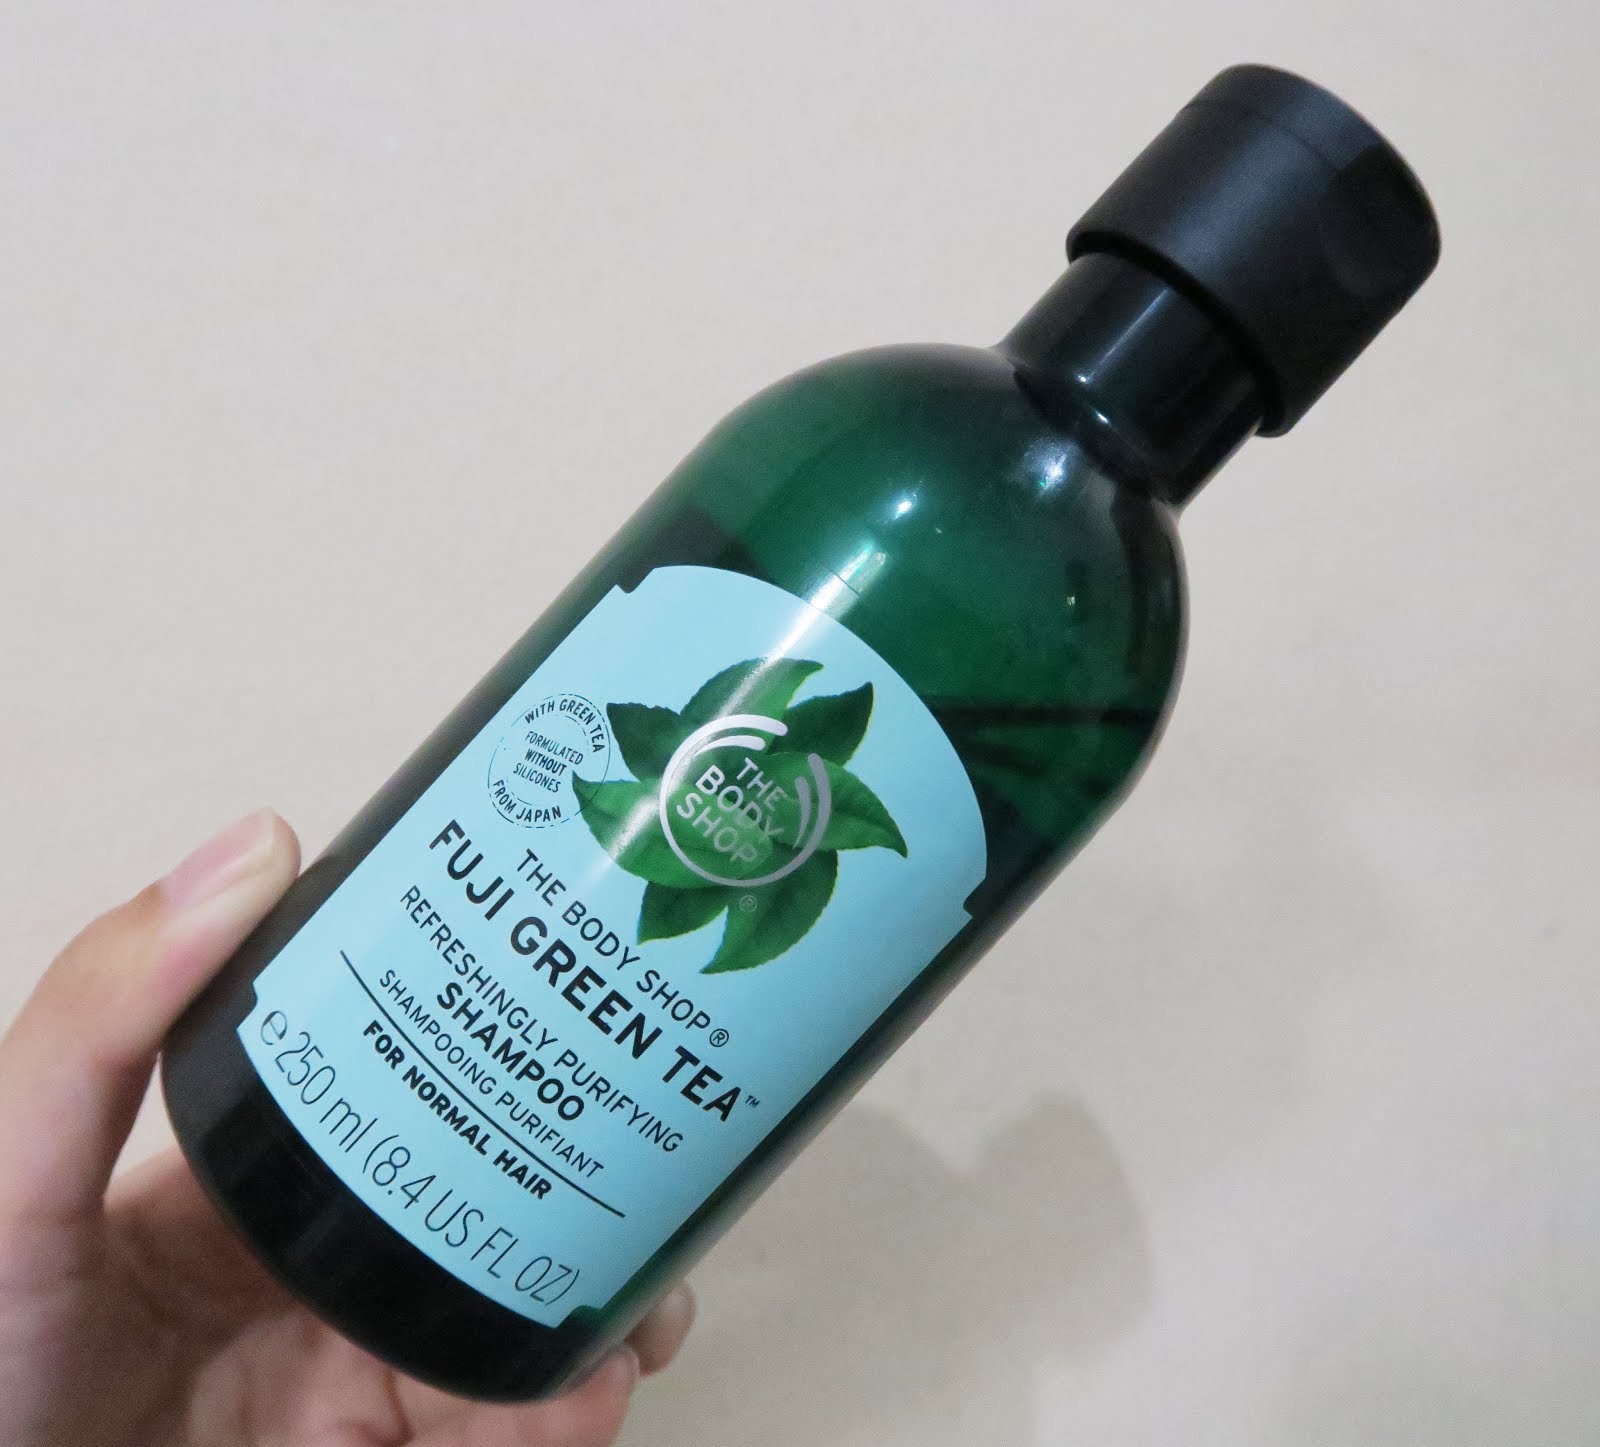 Kvalifikation internettet Nægte The Body Shop Fuji Green Tea Refreshingly Purifying Shampoo Review